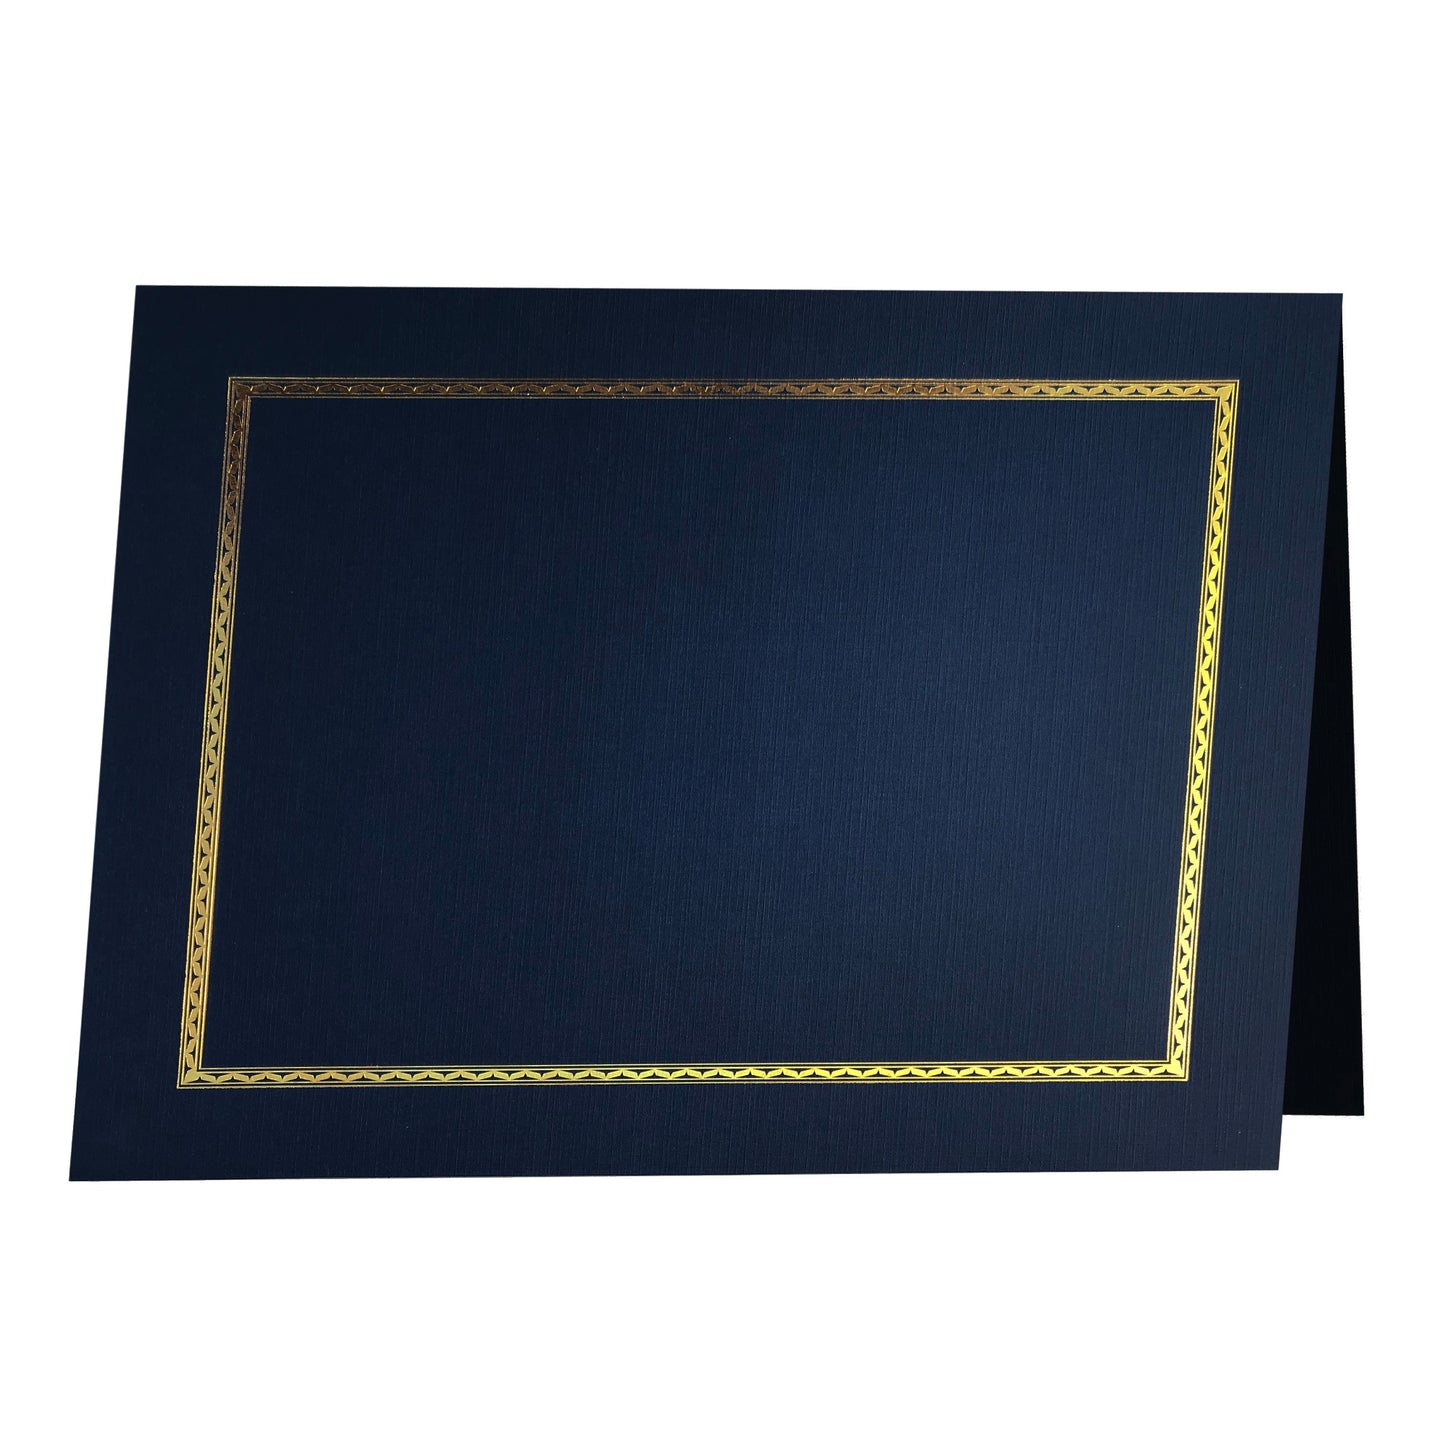 St. James® Elite™ Aztec Certificate Holders, Navy Linen with Gold Foil, Pack of 25